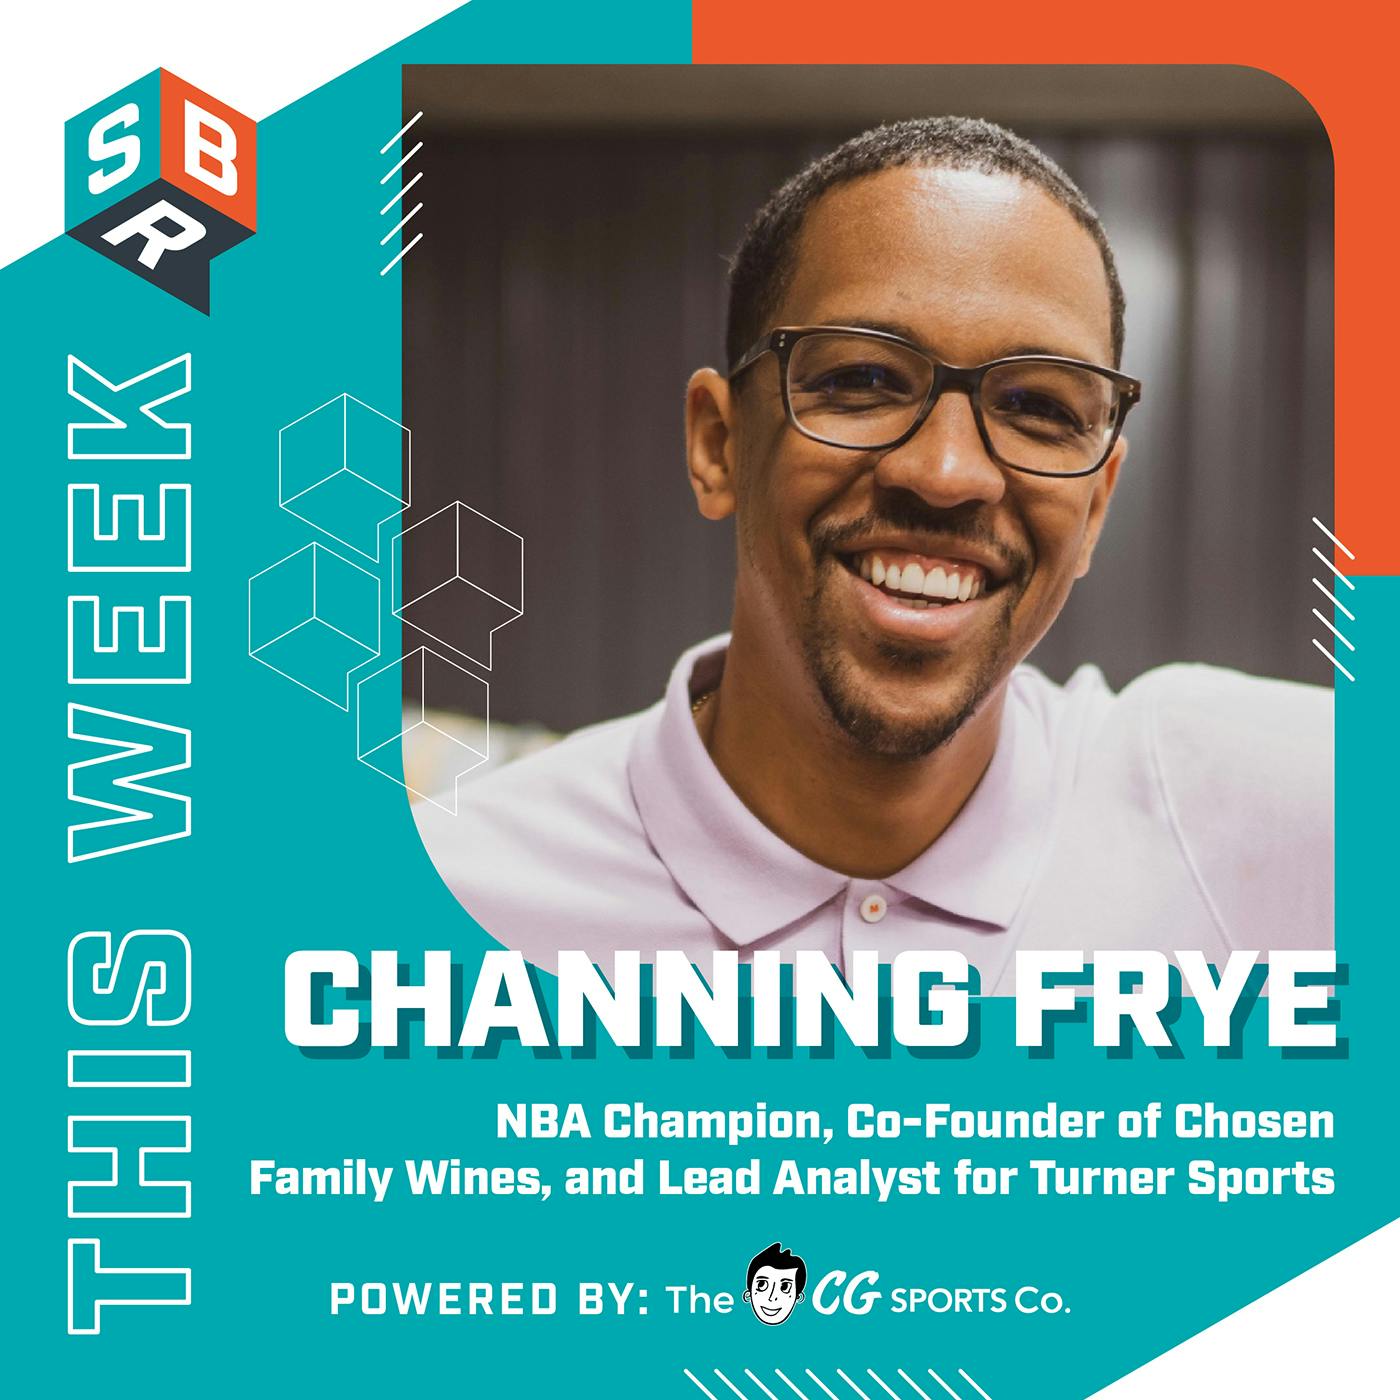 Channing Frye (@ChanningFrye), NBA Champion, Co-Founder of Chosen Family Wines & Lead Analyst for Turner Sports